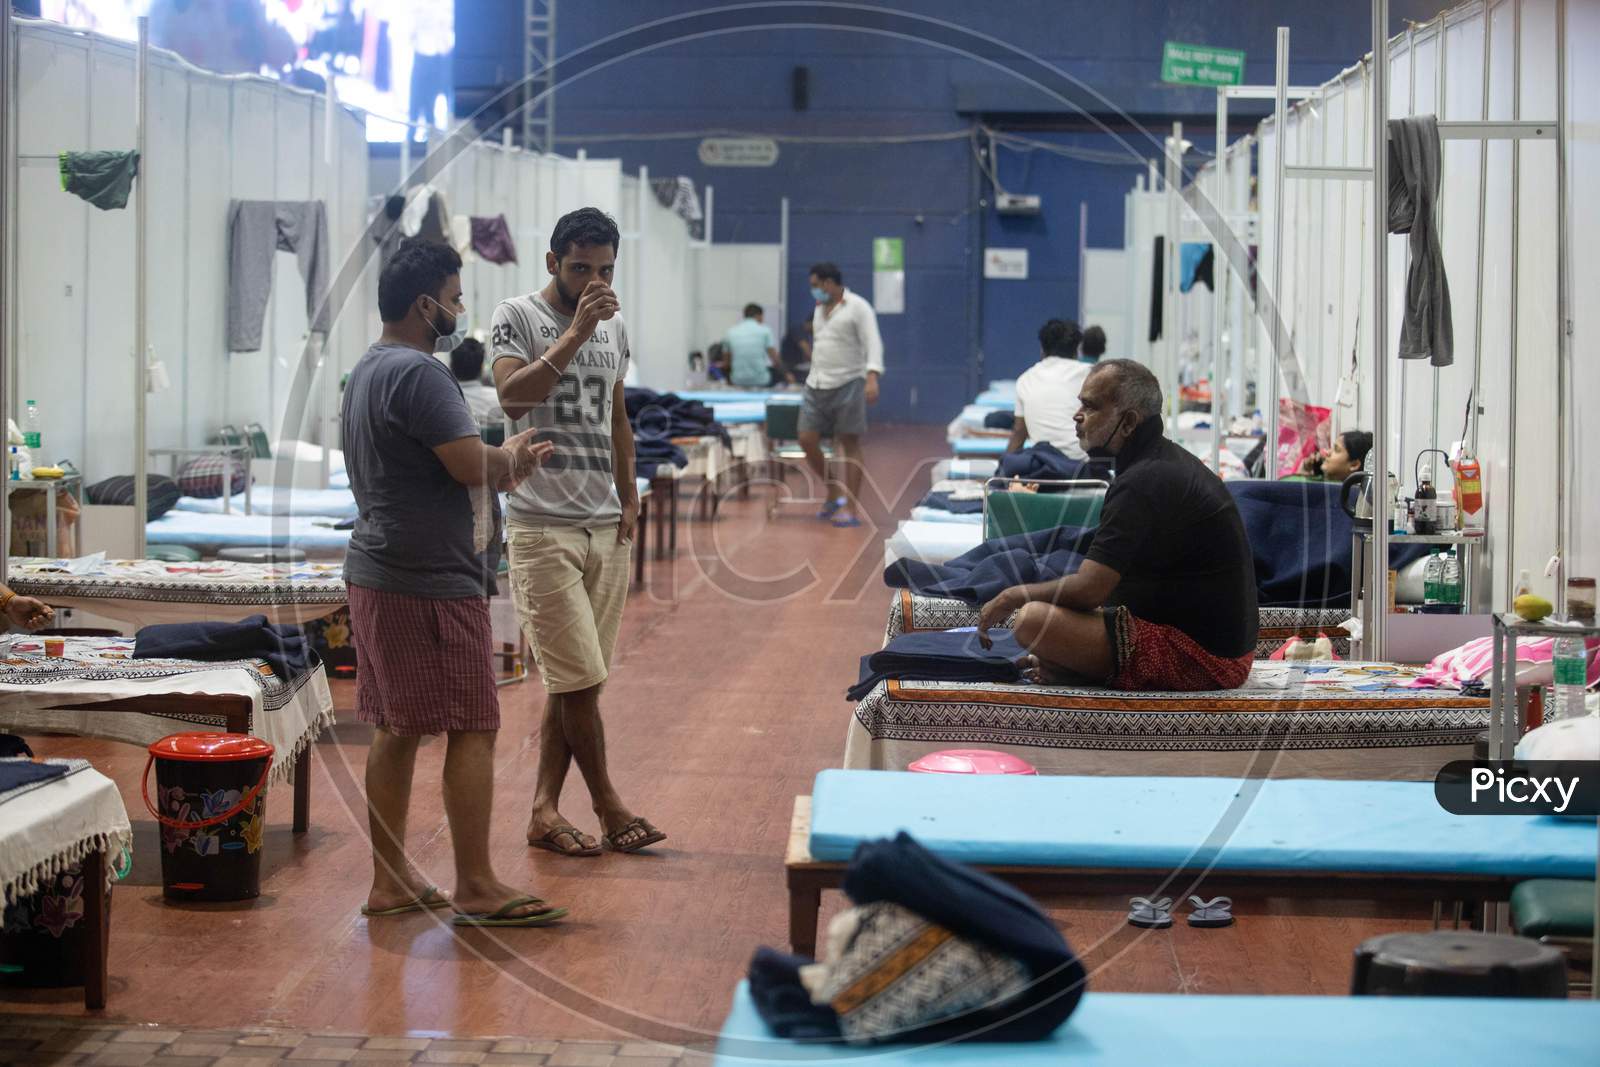 Patients tested positive for Coronavirus interact with each other while they are quarantined at Commonwealth Games Stadium which has been converted into a Coronavirus Care Centre in New Delhi on July 17, 2020